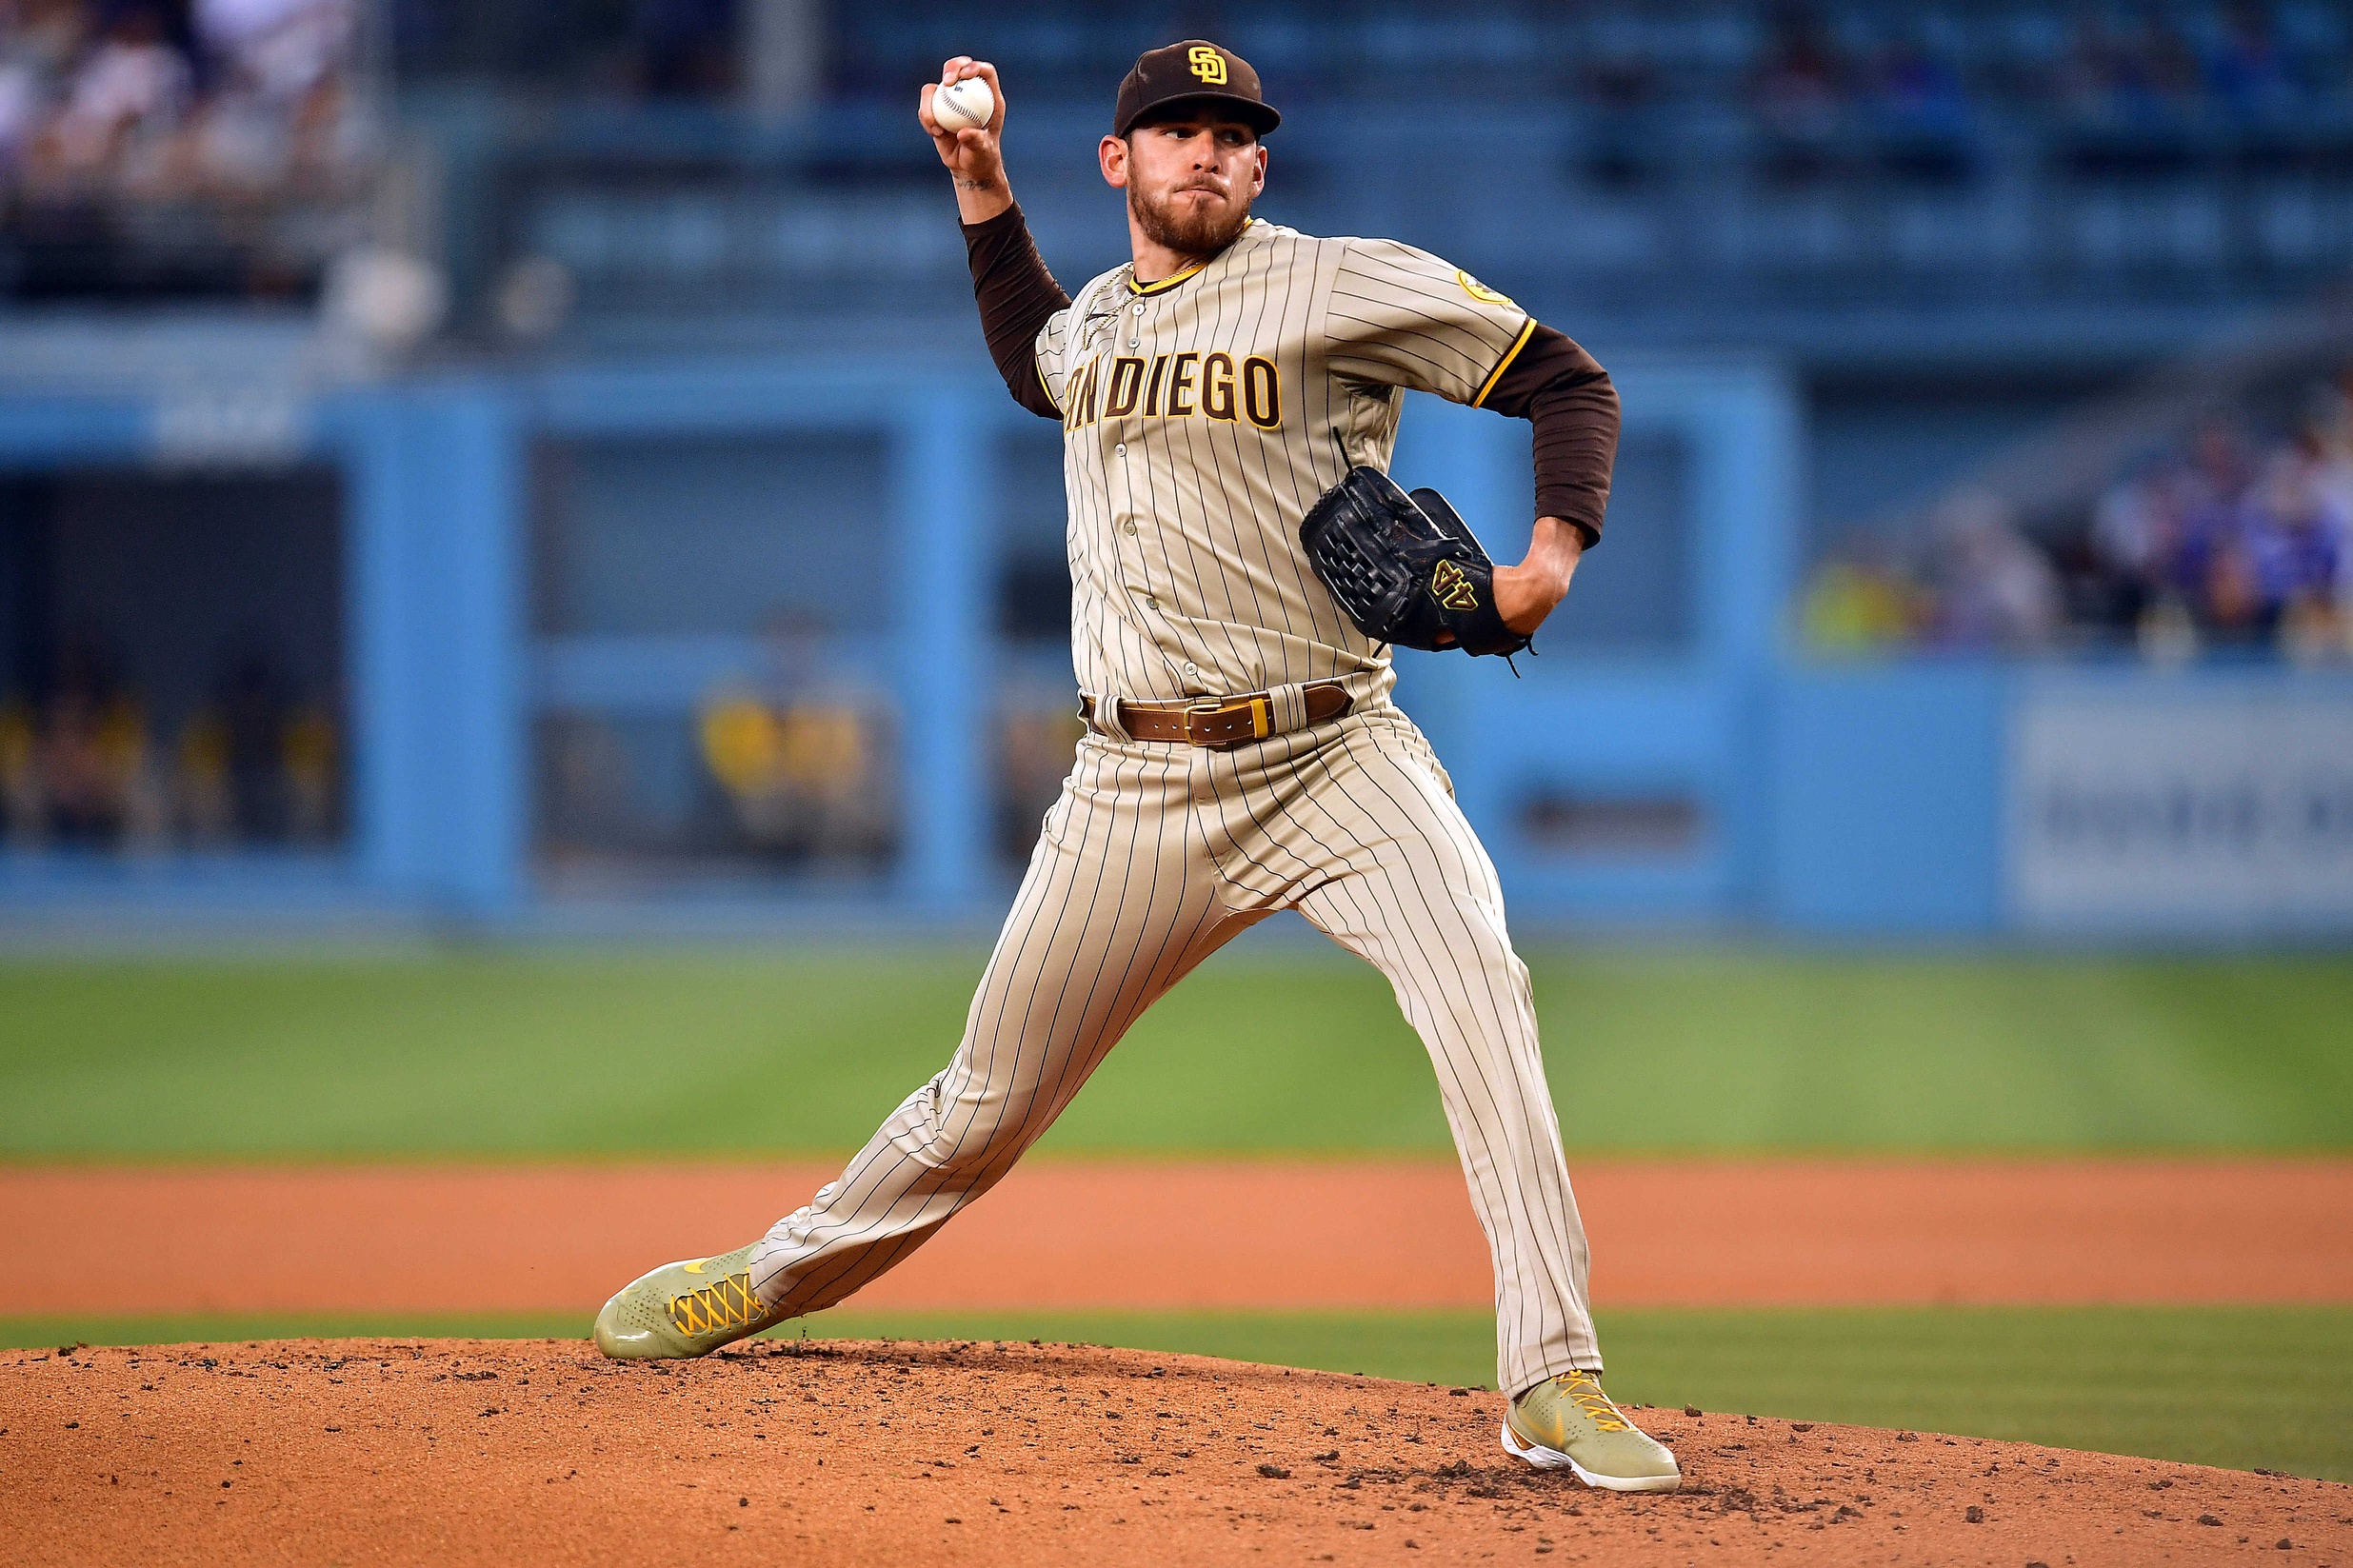 Jun 30, 2022; Los Angeles, California, USA; San Diego Padres starting pitcher Joe Musgrove (44) throws against the Los Angeles Dodgers during the third inning at Dodger Stadium. Mandatory Credit: Gary A. Vasquez-USA TODAY Sports